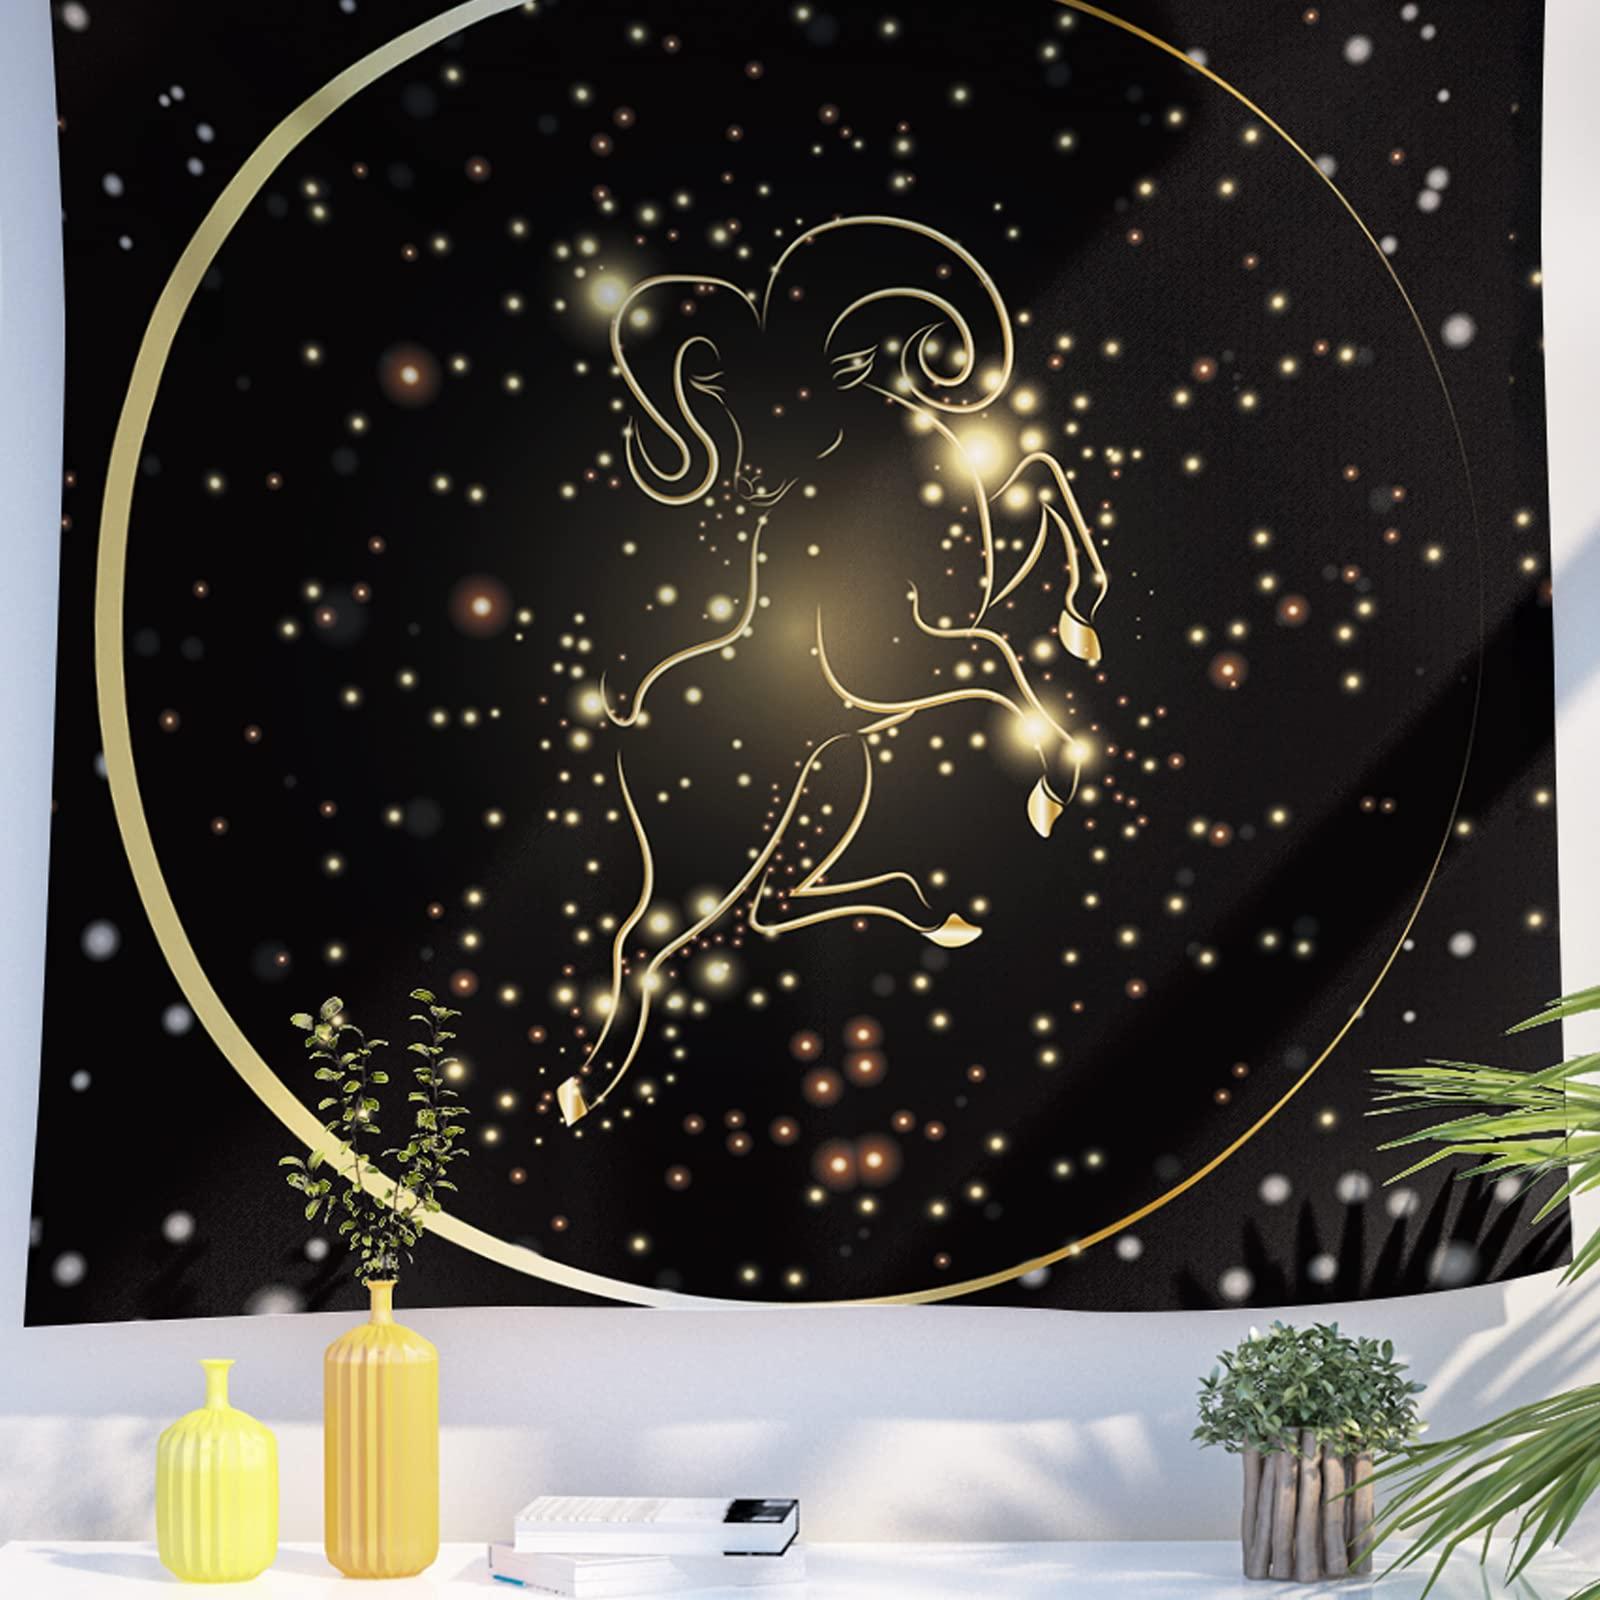 Berkin Arts Decor Tapestry for Wall Hanging Premium Polyester Fabric Backdrop Space Art Ornate Galactic Gold Gemini Gold Cloth Goddess Art 51.2 x 59.1 Inch